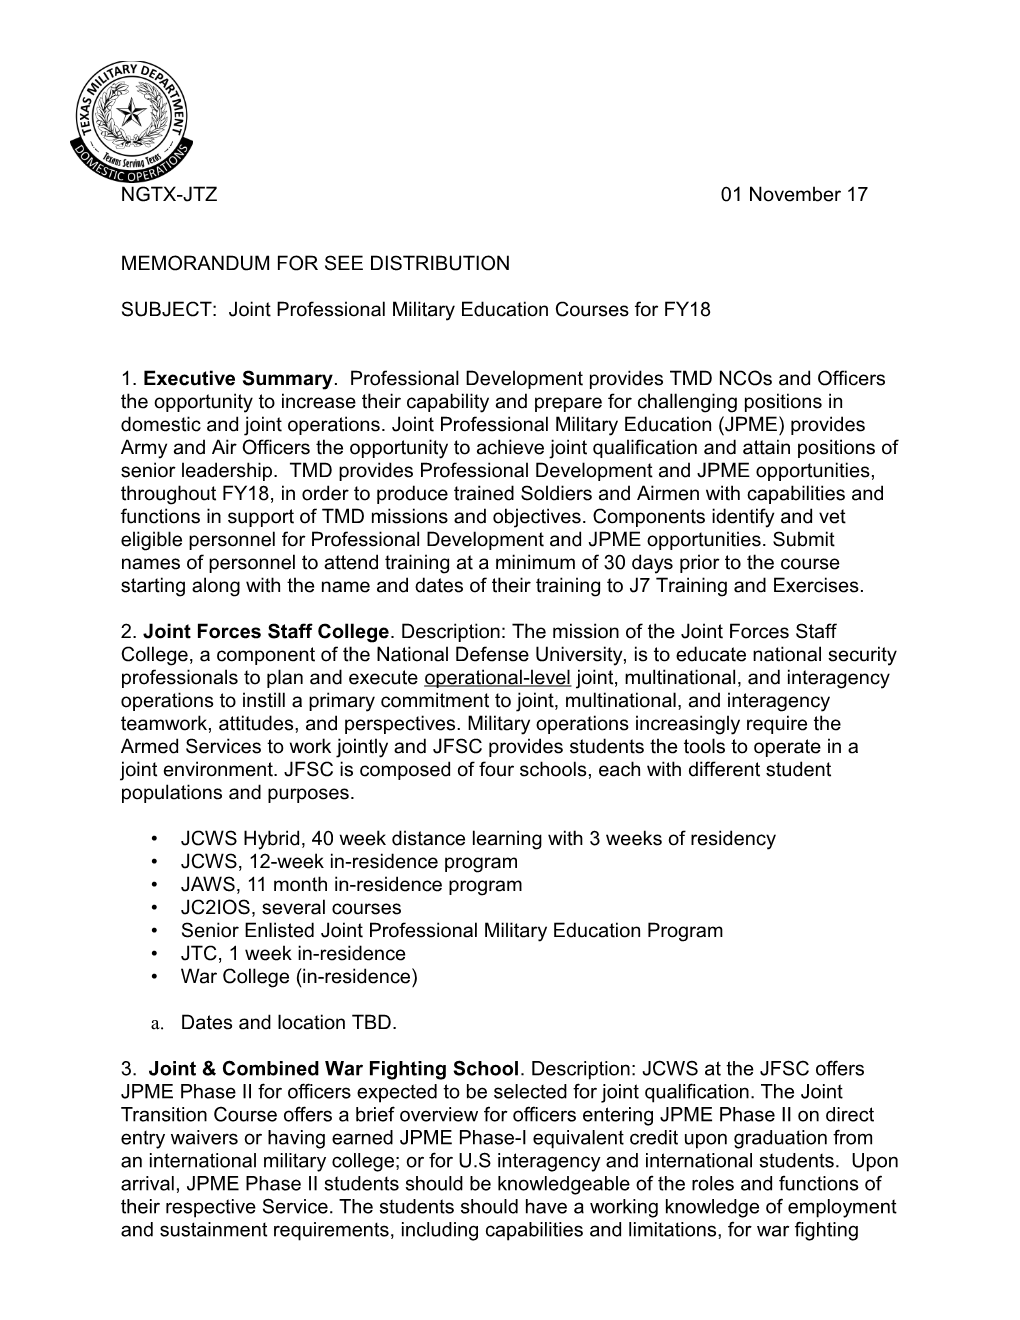 Subject: Joint Professional Military Education Courses for FY18